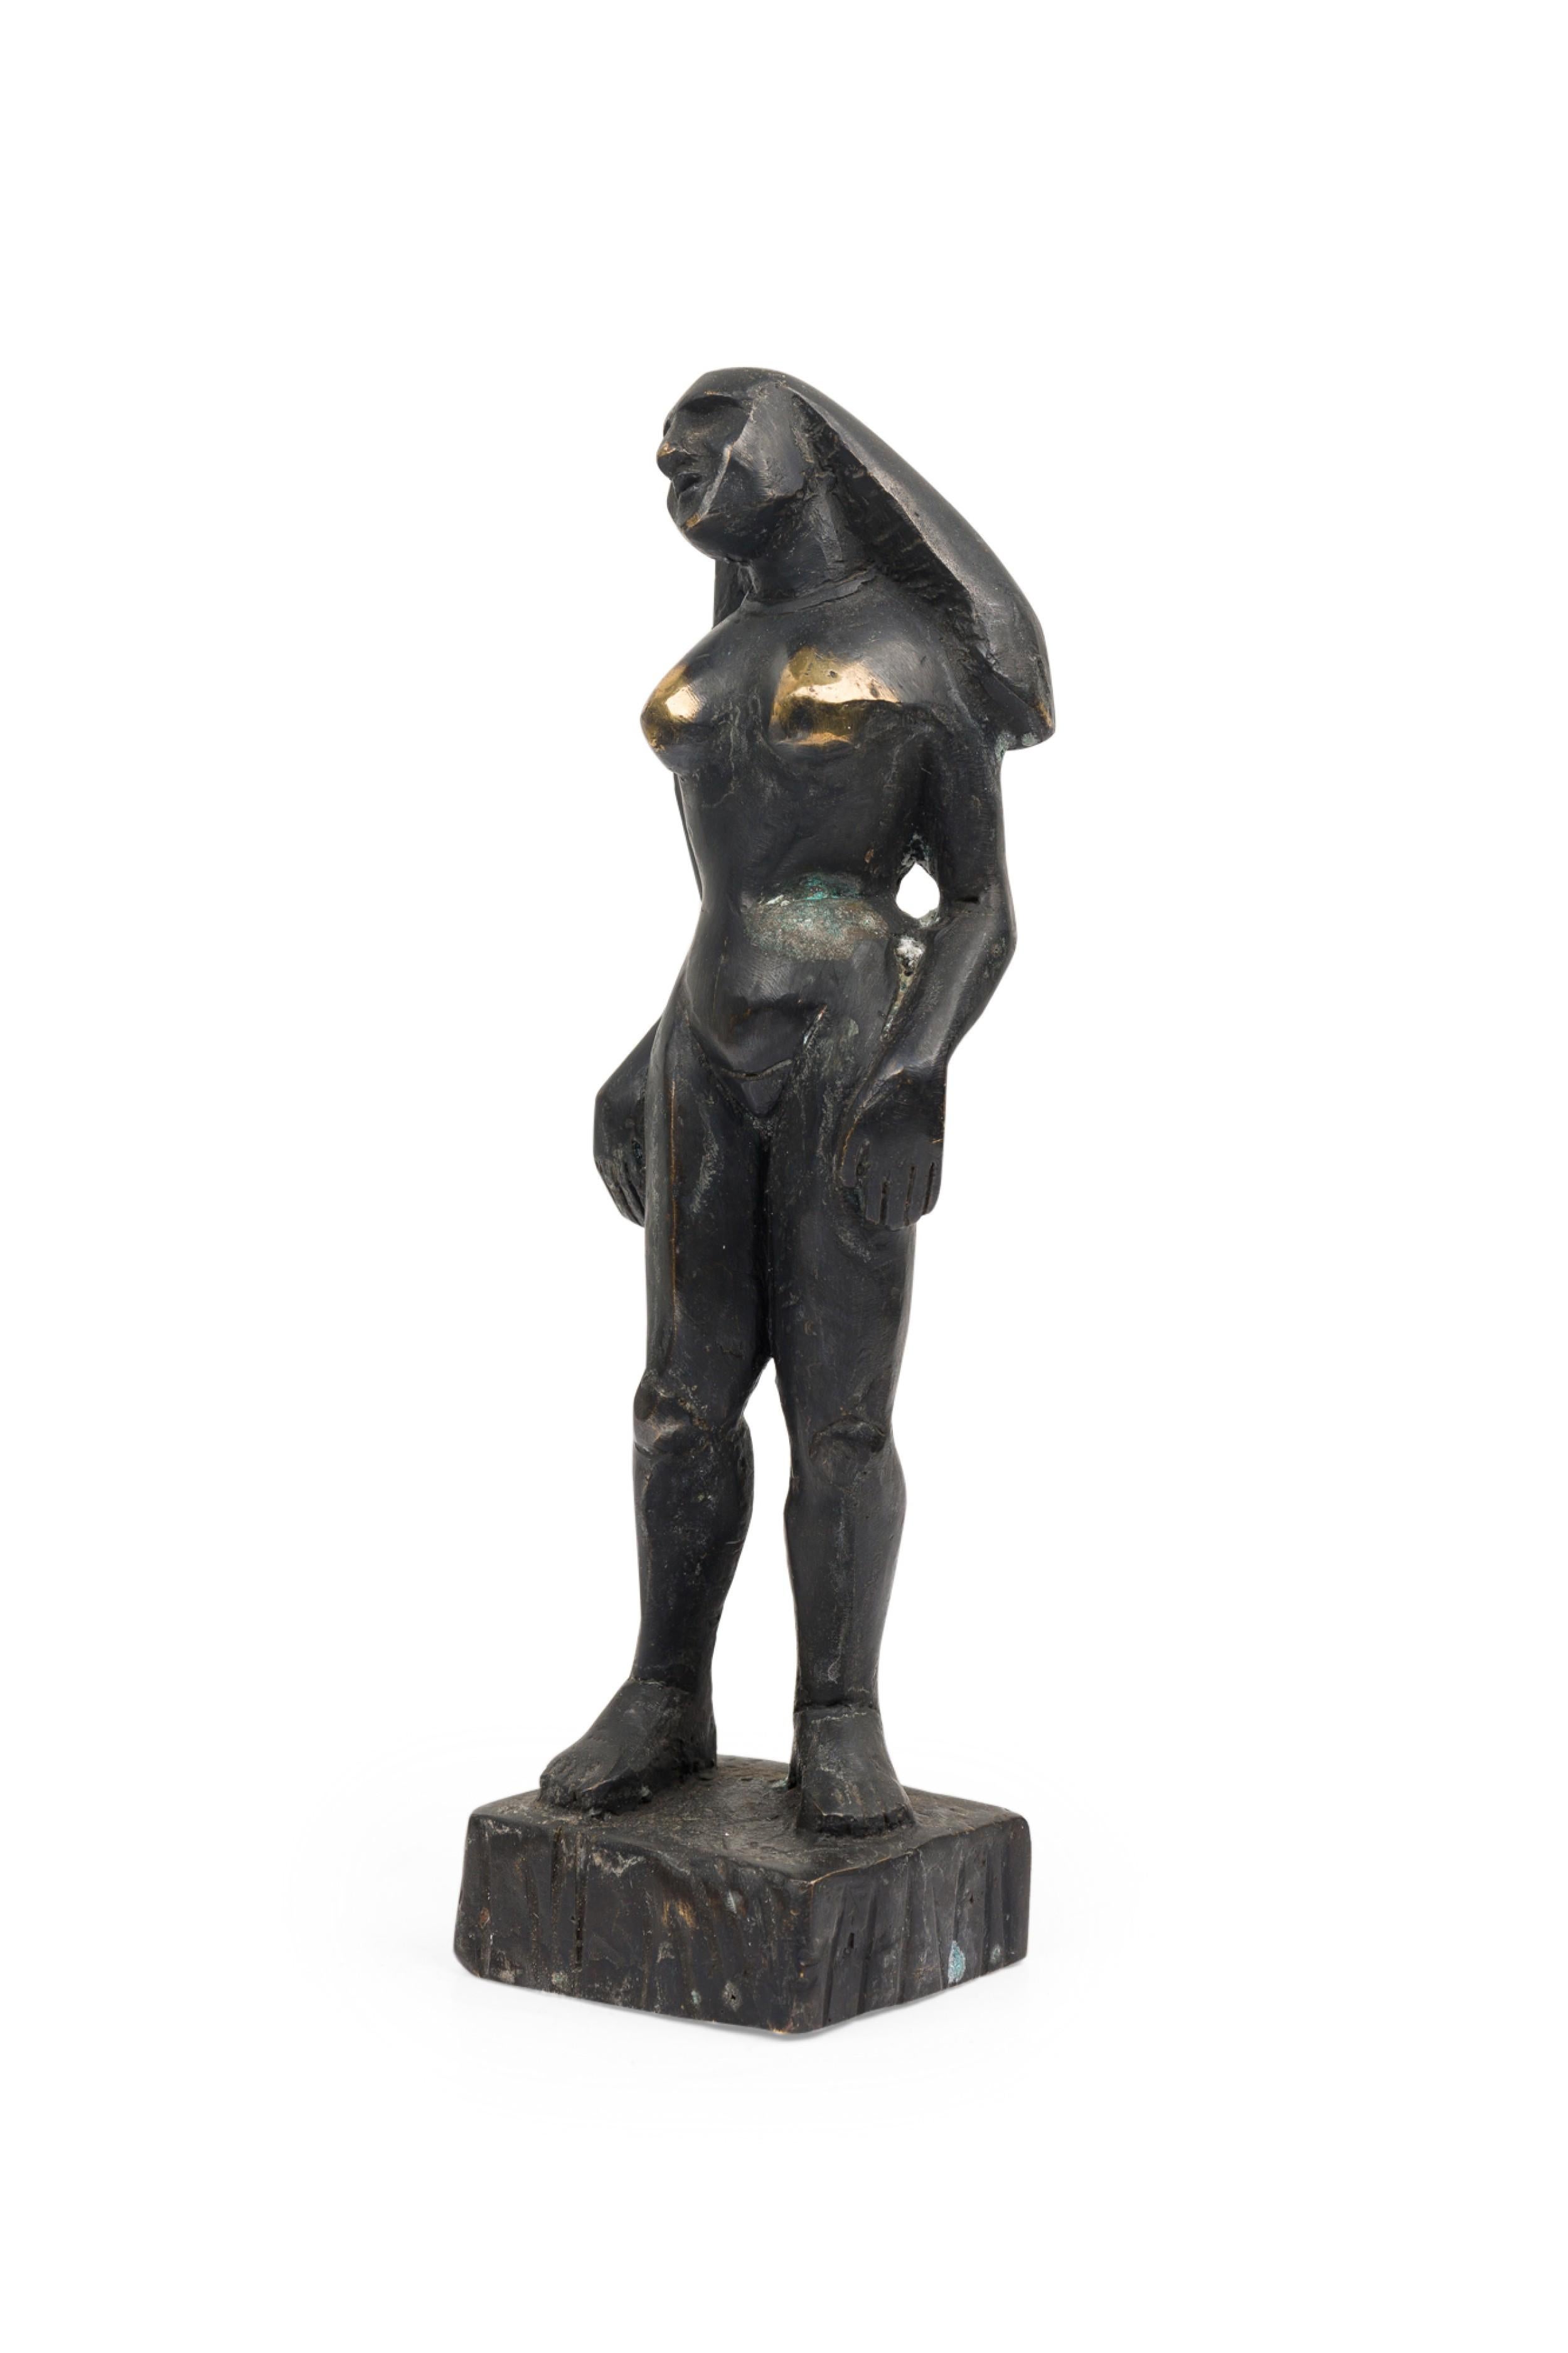 Contemporary hand-forged bronze Brutalist-inspired figural sculpture in an idle standing pose finished in an ebonized patina. (PRICED EACH) (